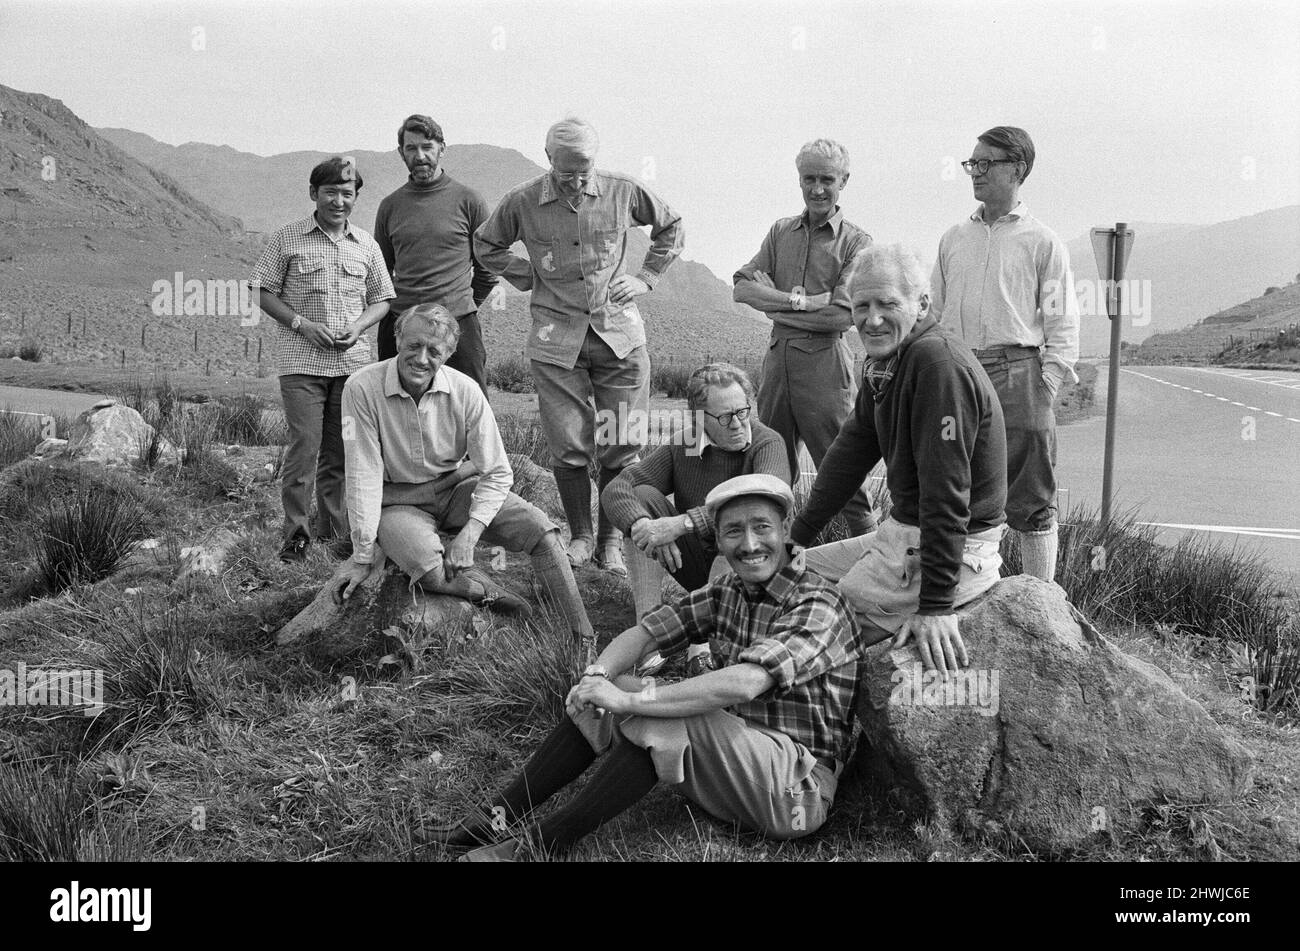 Everest Men reunion at The Pen-y-Grwd Training base at Capel Curig, North Wales.  26th May 1973 It is 20 years on from the 1953 Everest Climb, with this reunion in Wales in May 1973  Picture features : Lord Hunt, ( white hair, dark top, sitting on rock to the right). Sherpa Tensing Norgay (Sherpa Tenzing Norgay) is in the chequered shirt and cap sitting on the ground in the forefront ), far left, standing at the back, hands together is Sherpa Gombu, the man who has been to Everest Twice.The other men here are no id'd Note, Sir Edmund Hillary was not able to make this reunion.  Picture taken 26 Stock Photo